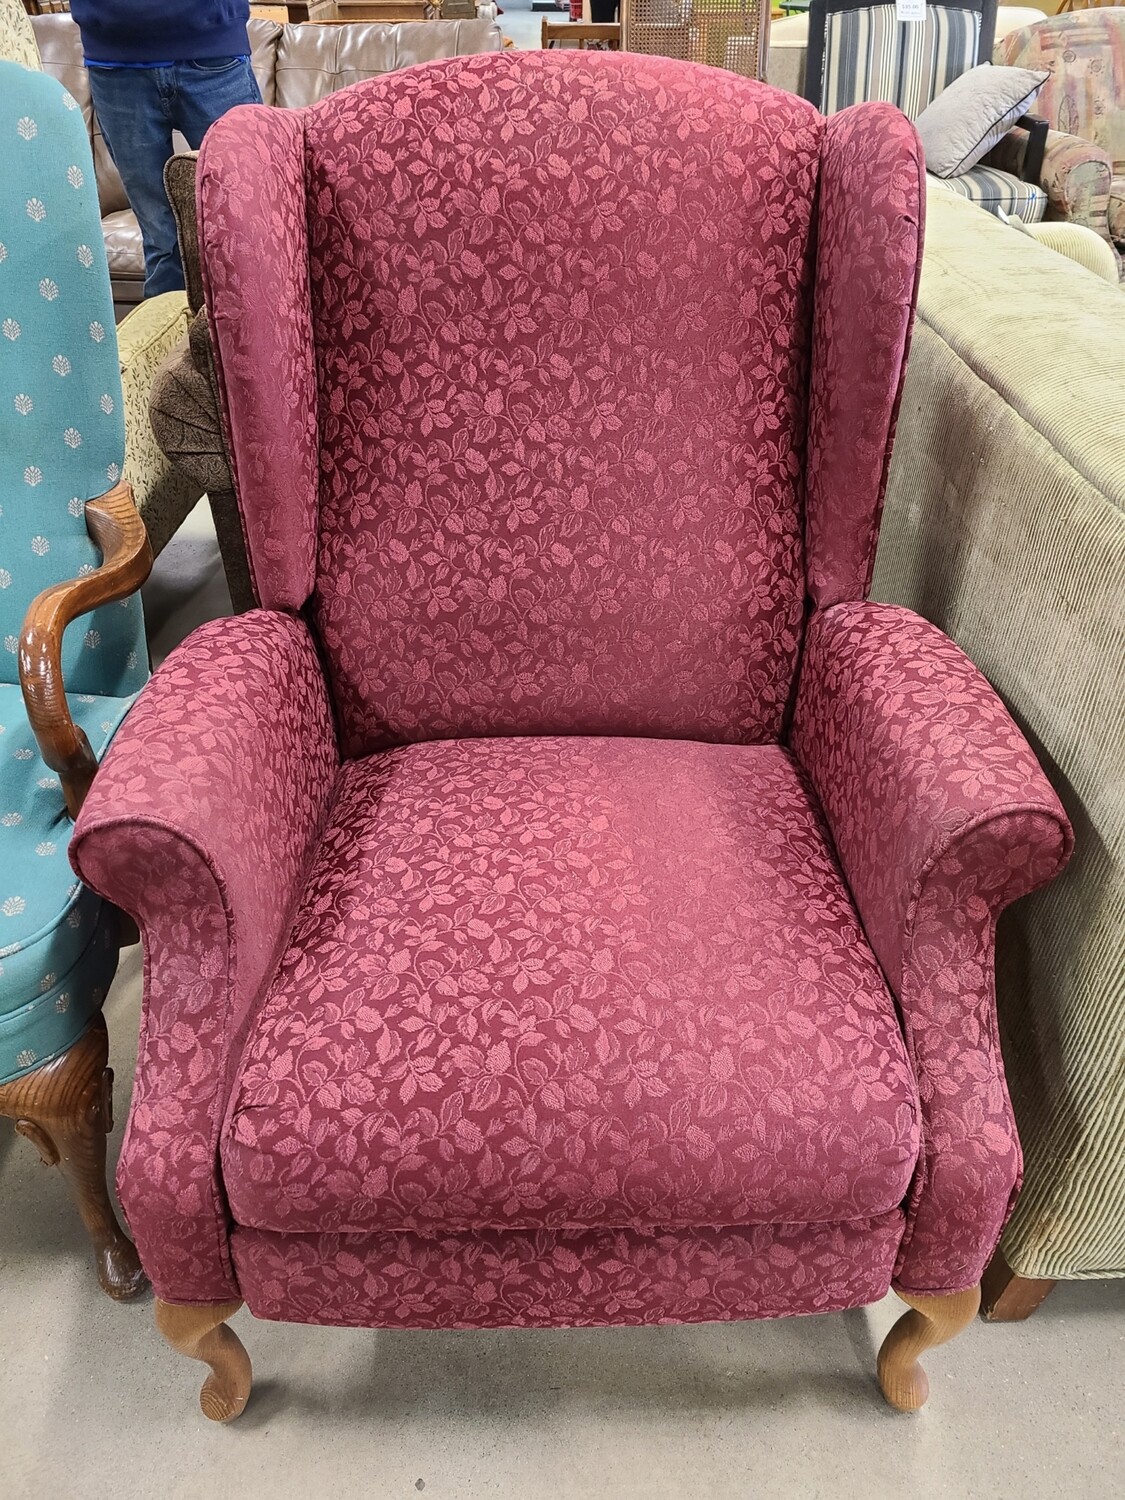 Red Wingback Recliner